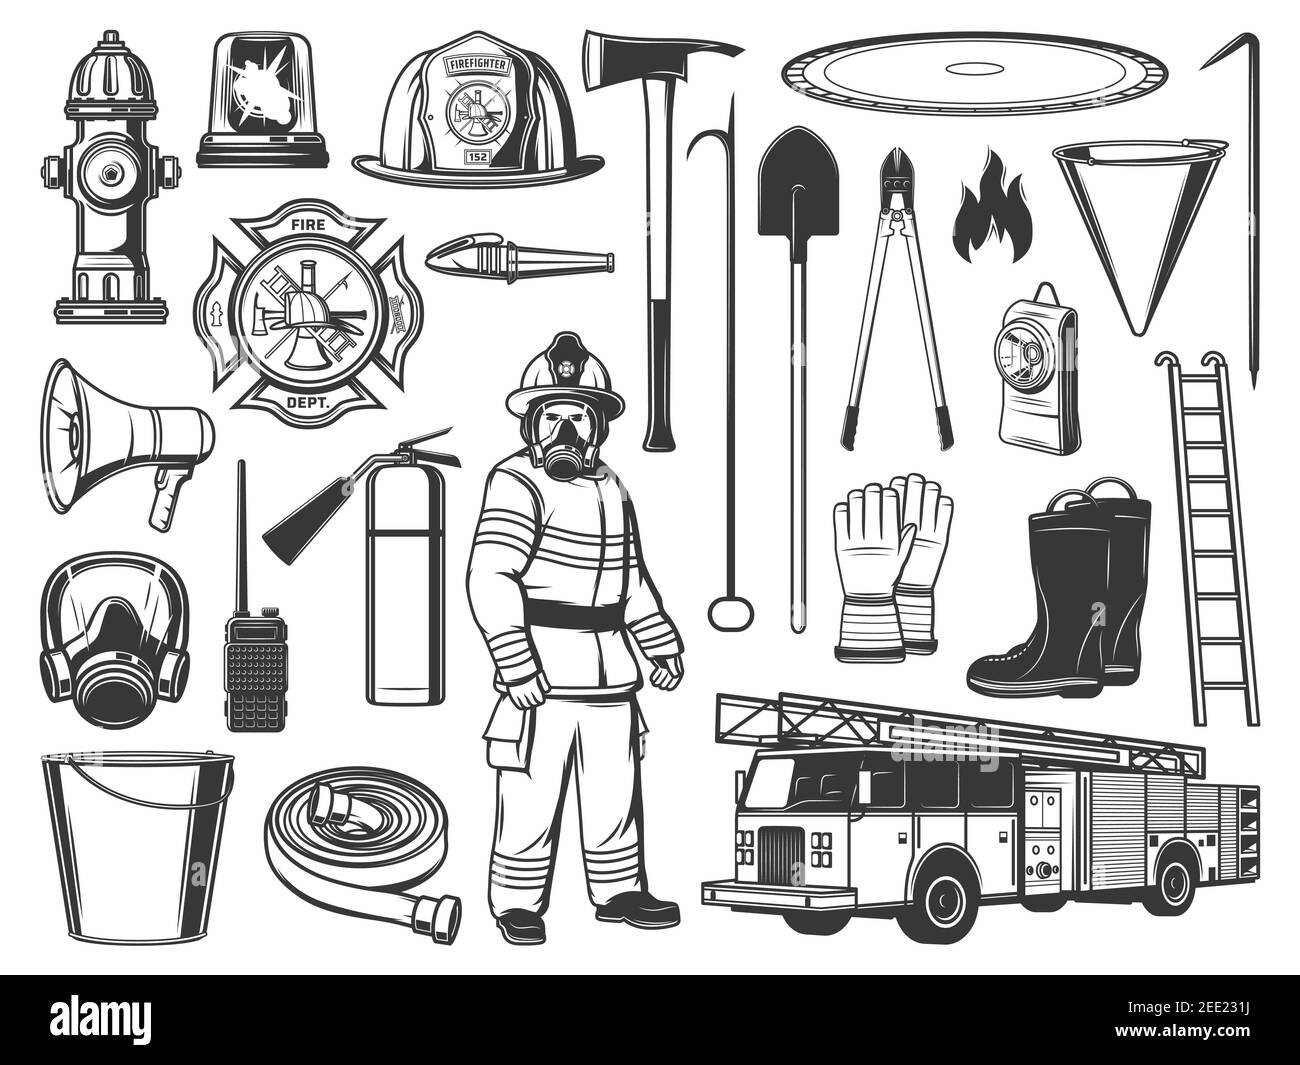 Firefighter tools and equipment engraved icons. Firefighter in protective uniform, helmet and gas mask, extinguisher, fire truck and hydrant, shovel a Stock Vector